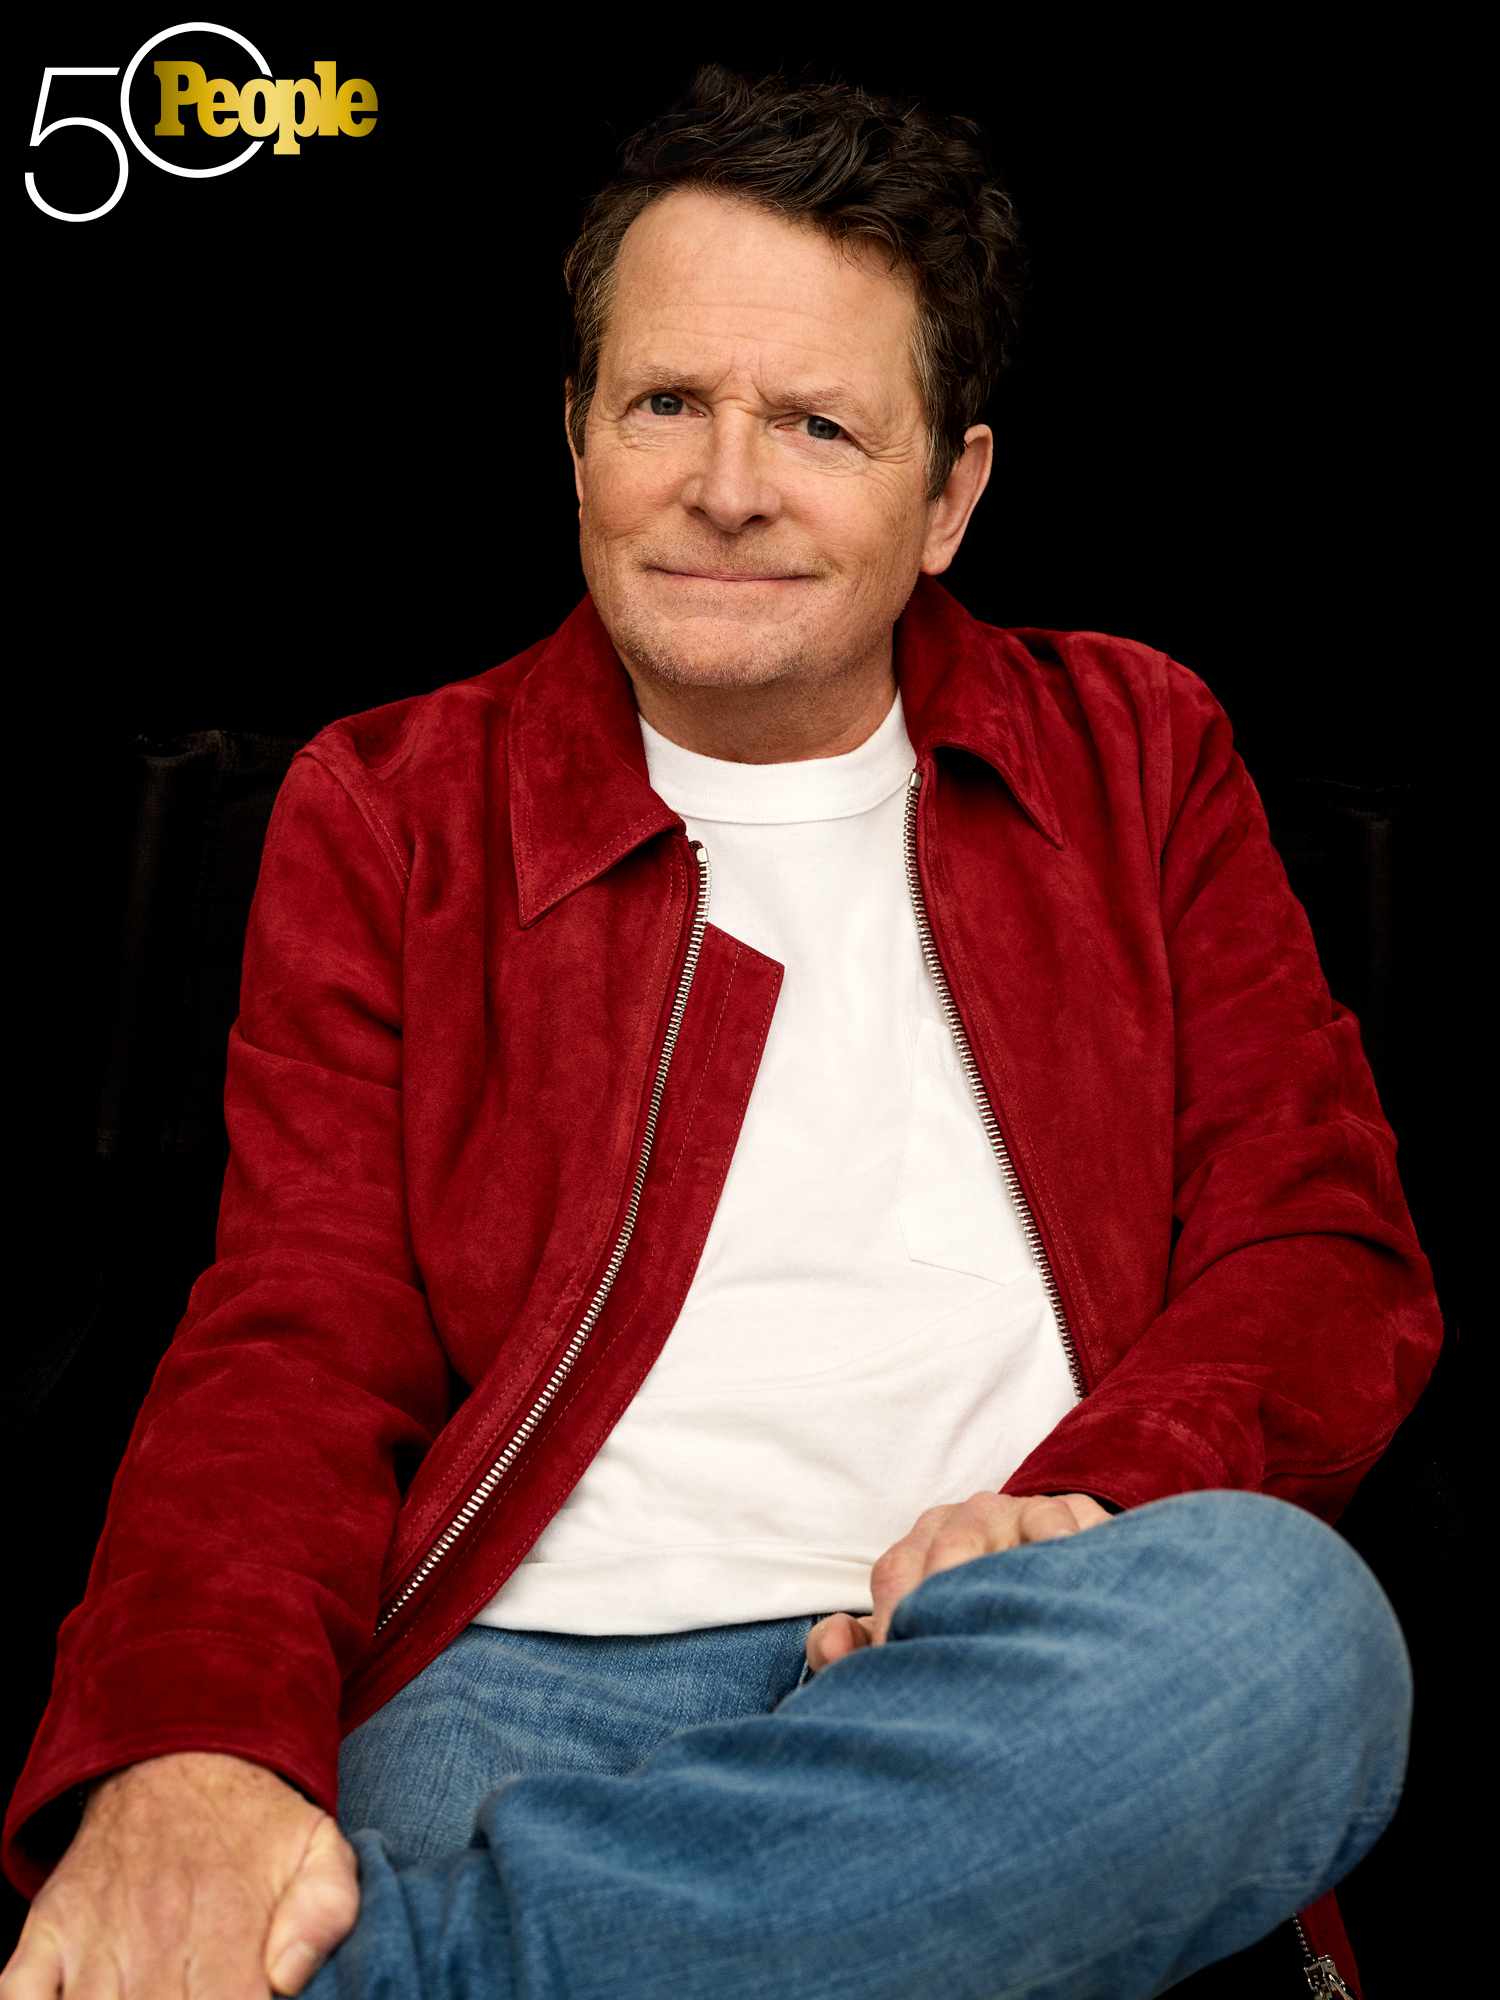 People 50th Anniversary MICHAEL J FOX - photographed 2/26/24 at Jack Studios in New York, NY.